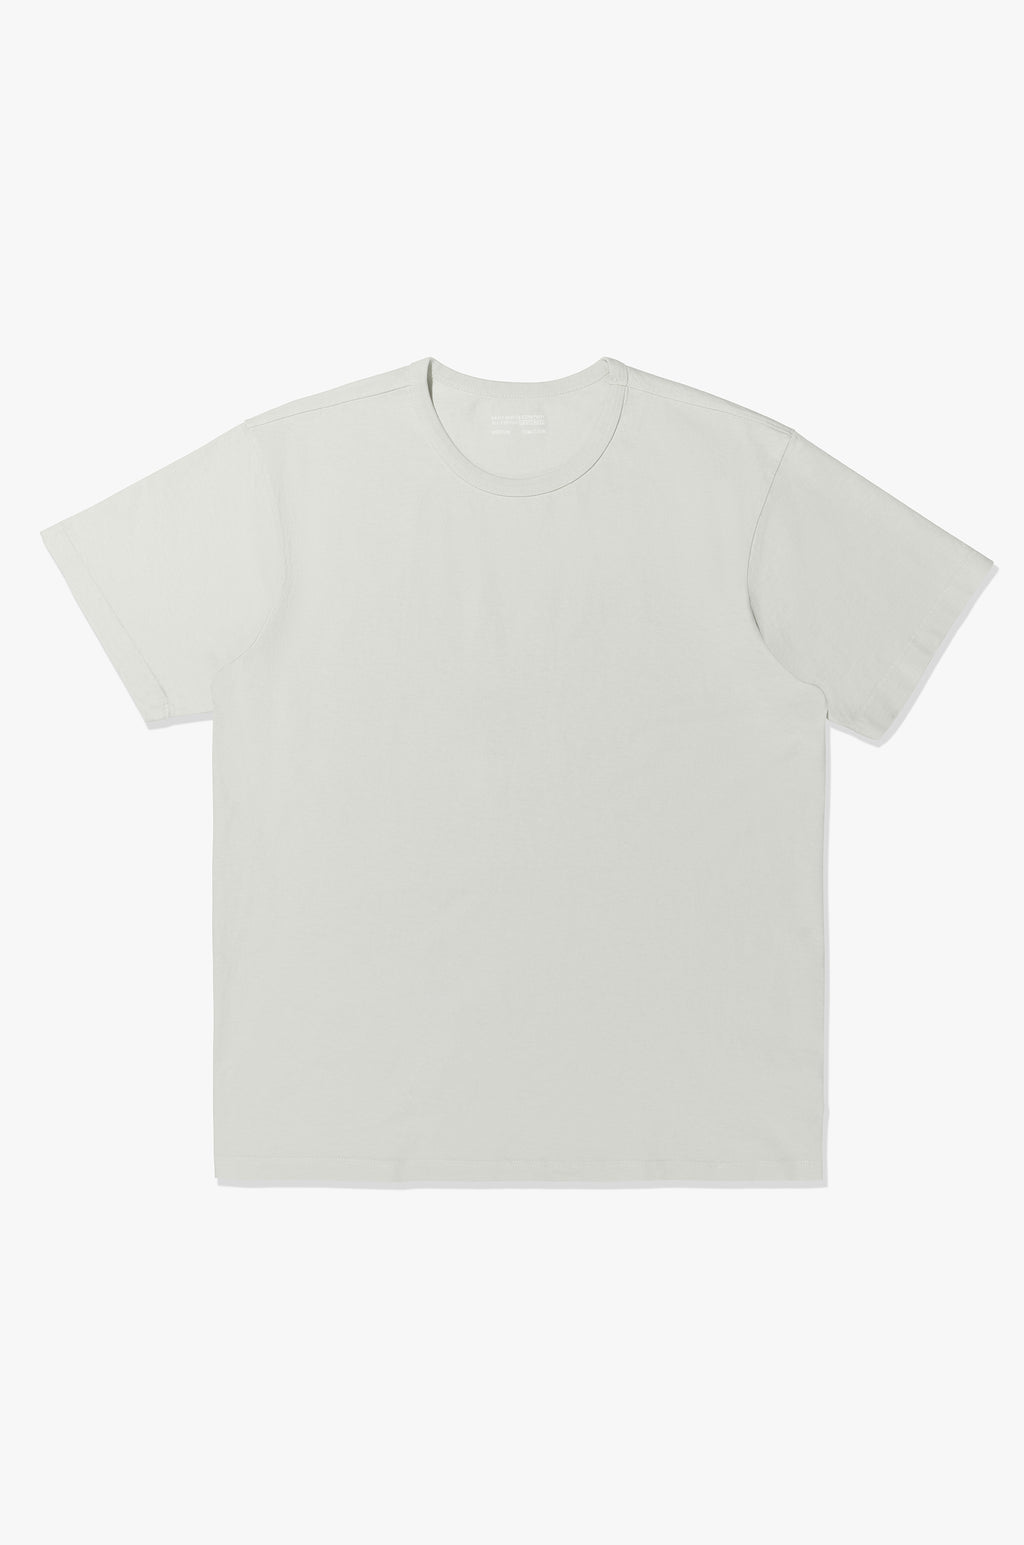 OFF T-SHIRT WHITE - OUR WHITE – LADY